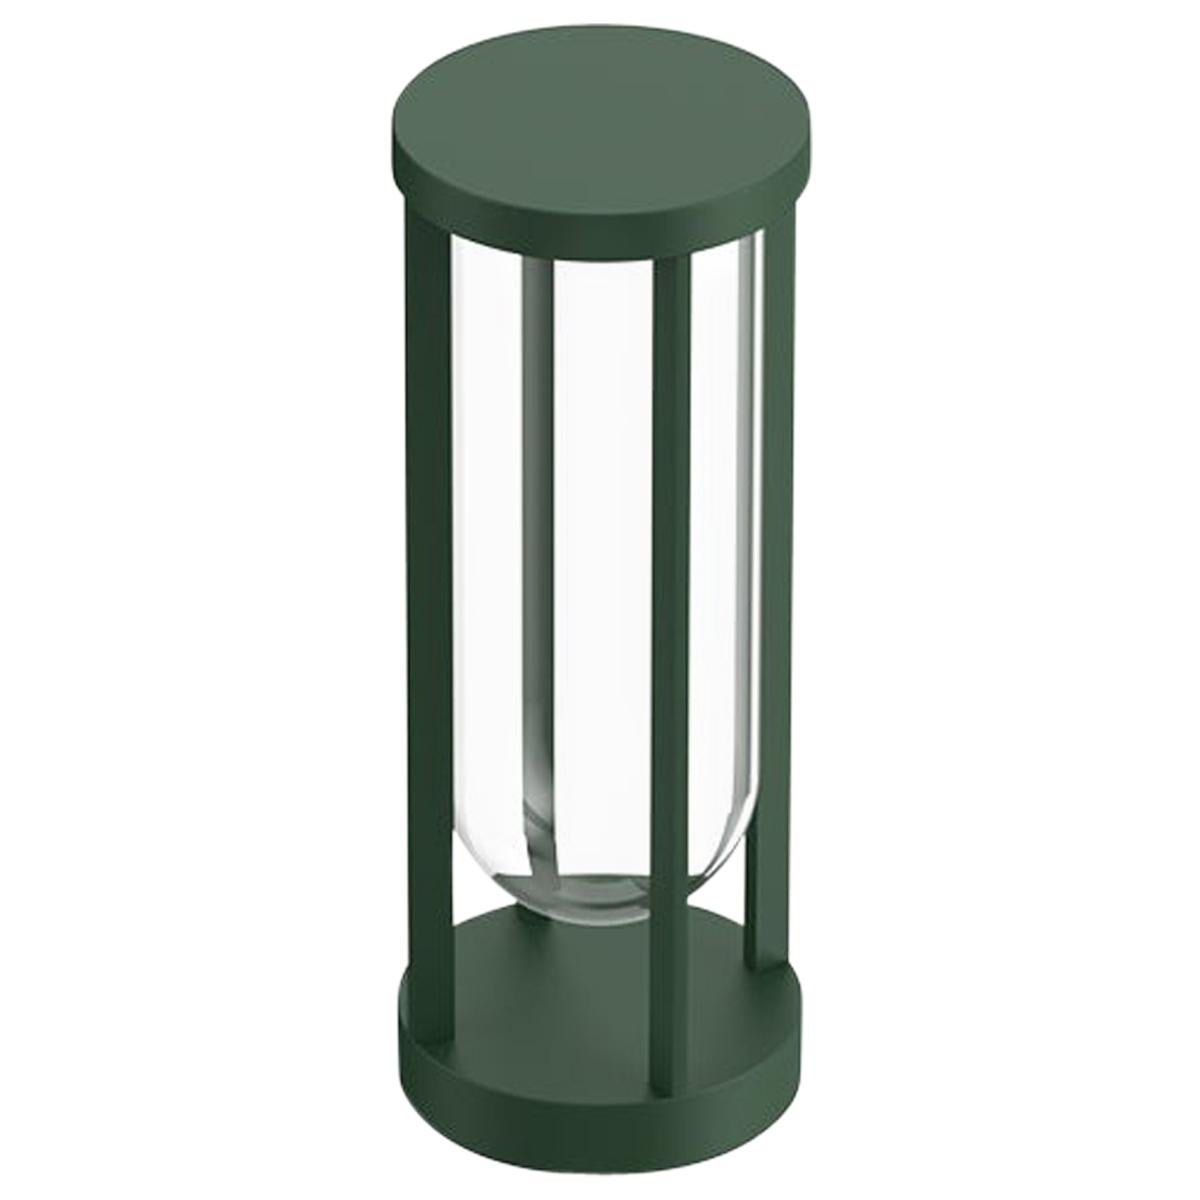 Flos In Vitro Bollard 1 0-10V 2700K Floor Lamp in Forest Green by Philippe Starc For Sale